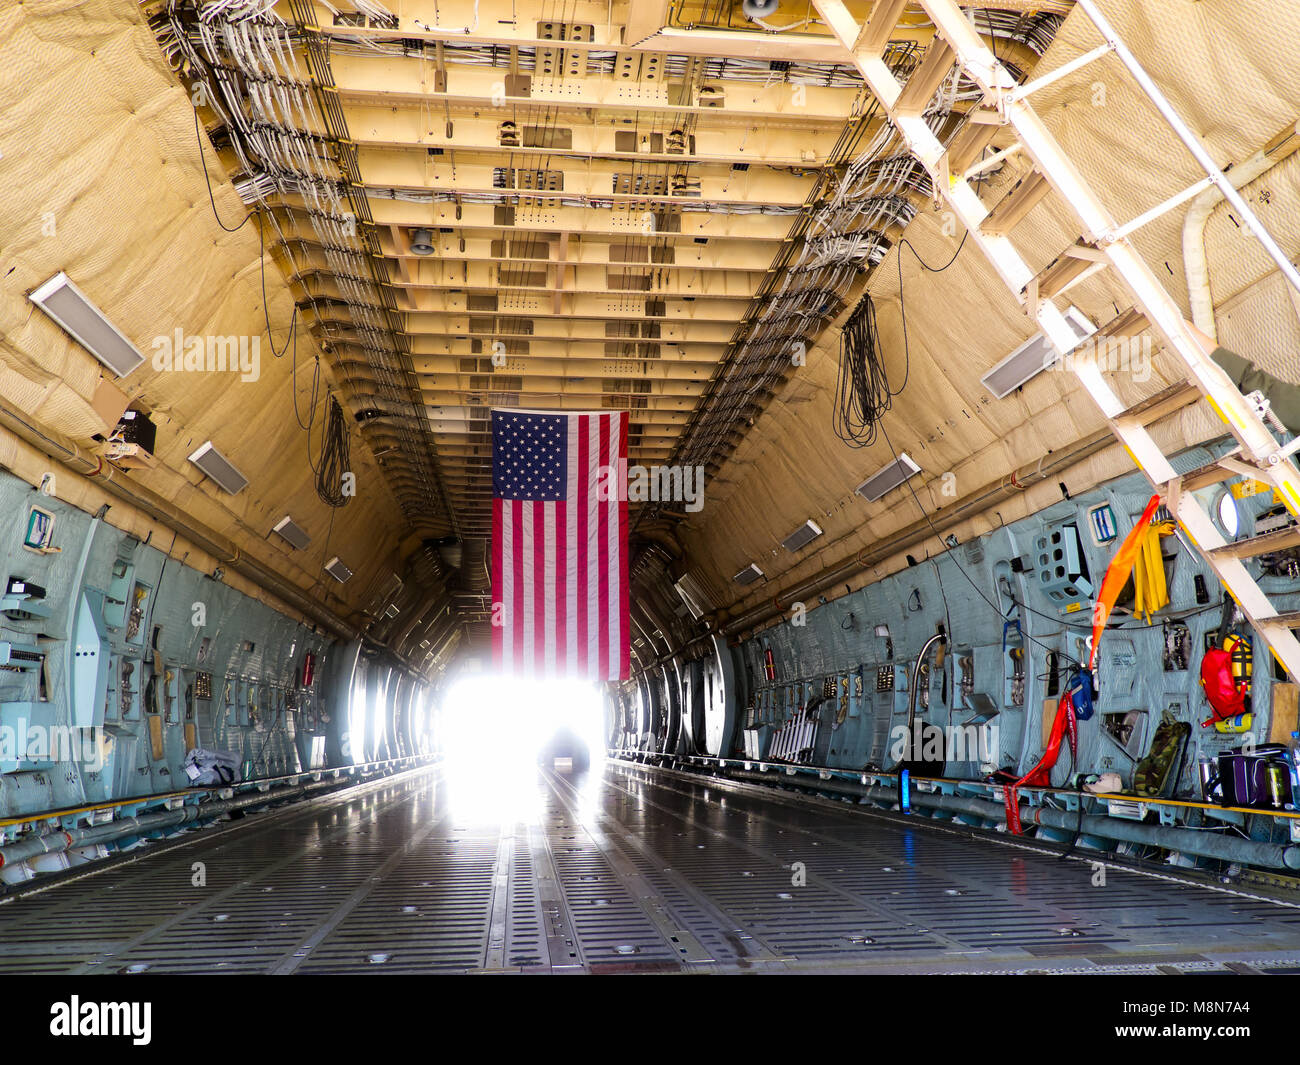 Lockheed C-5 Galaxy cargo hold of  military transport, intercontinental cargo strategic aircraft payload. ZHUKOWSKY - AUGUST 16 Stock Photo